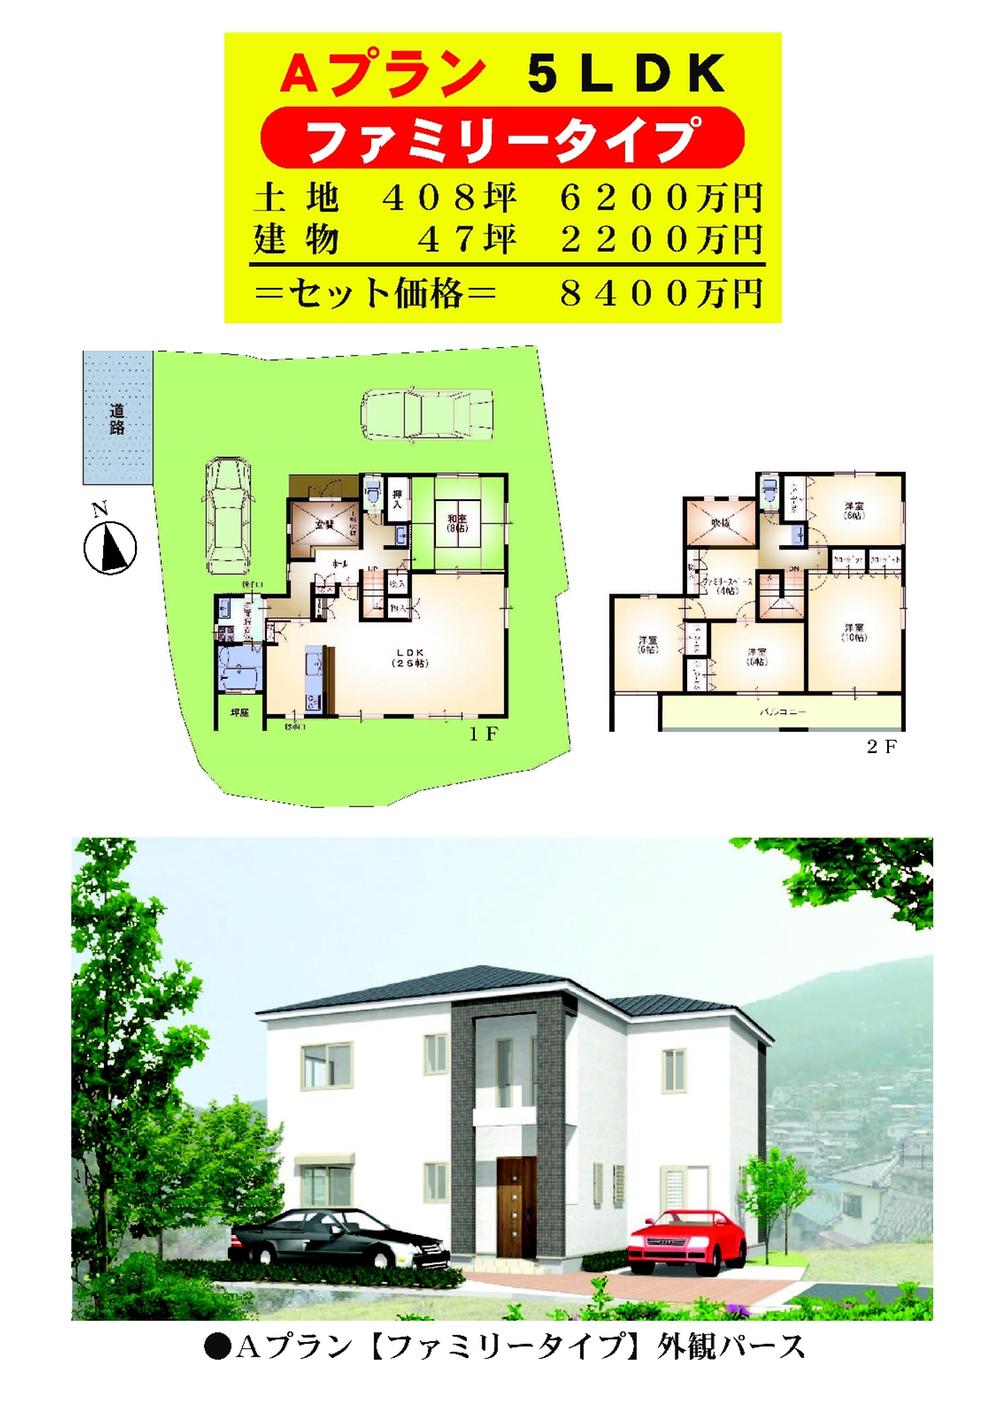 Building plan example (Perth ・ Introspection). ● Building plan A ● 5LDK 46.5 square meters 22 million yen [You can also trade in those without building conditions. ]